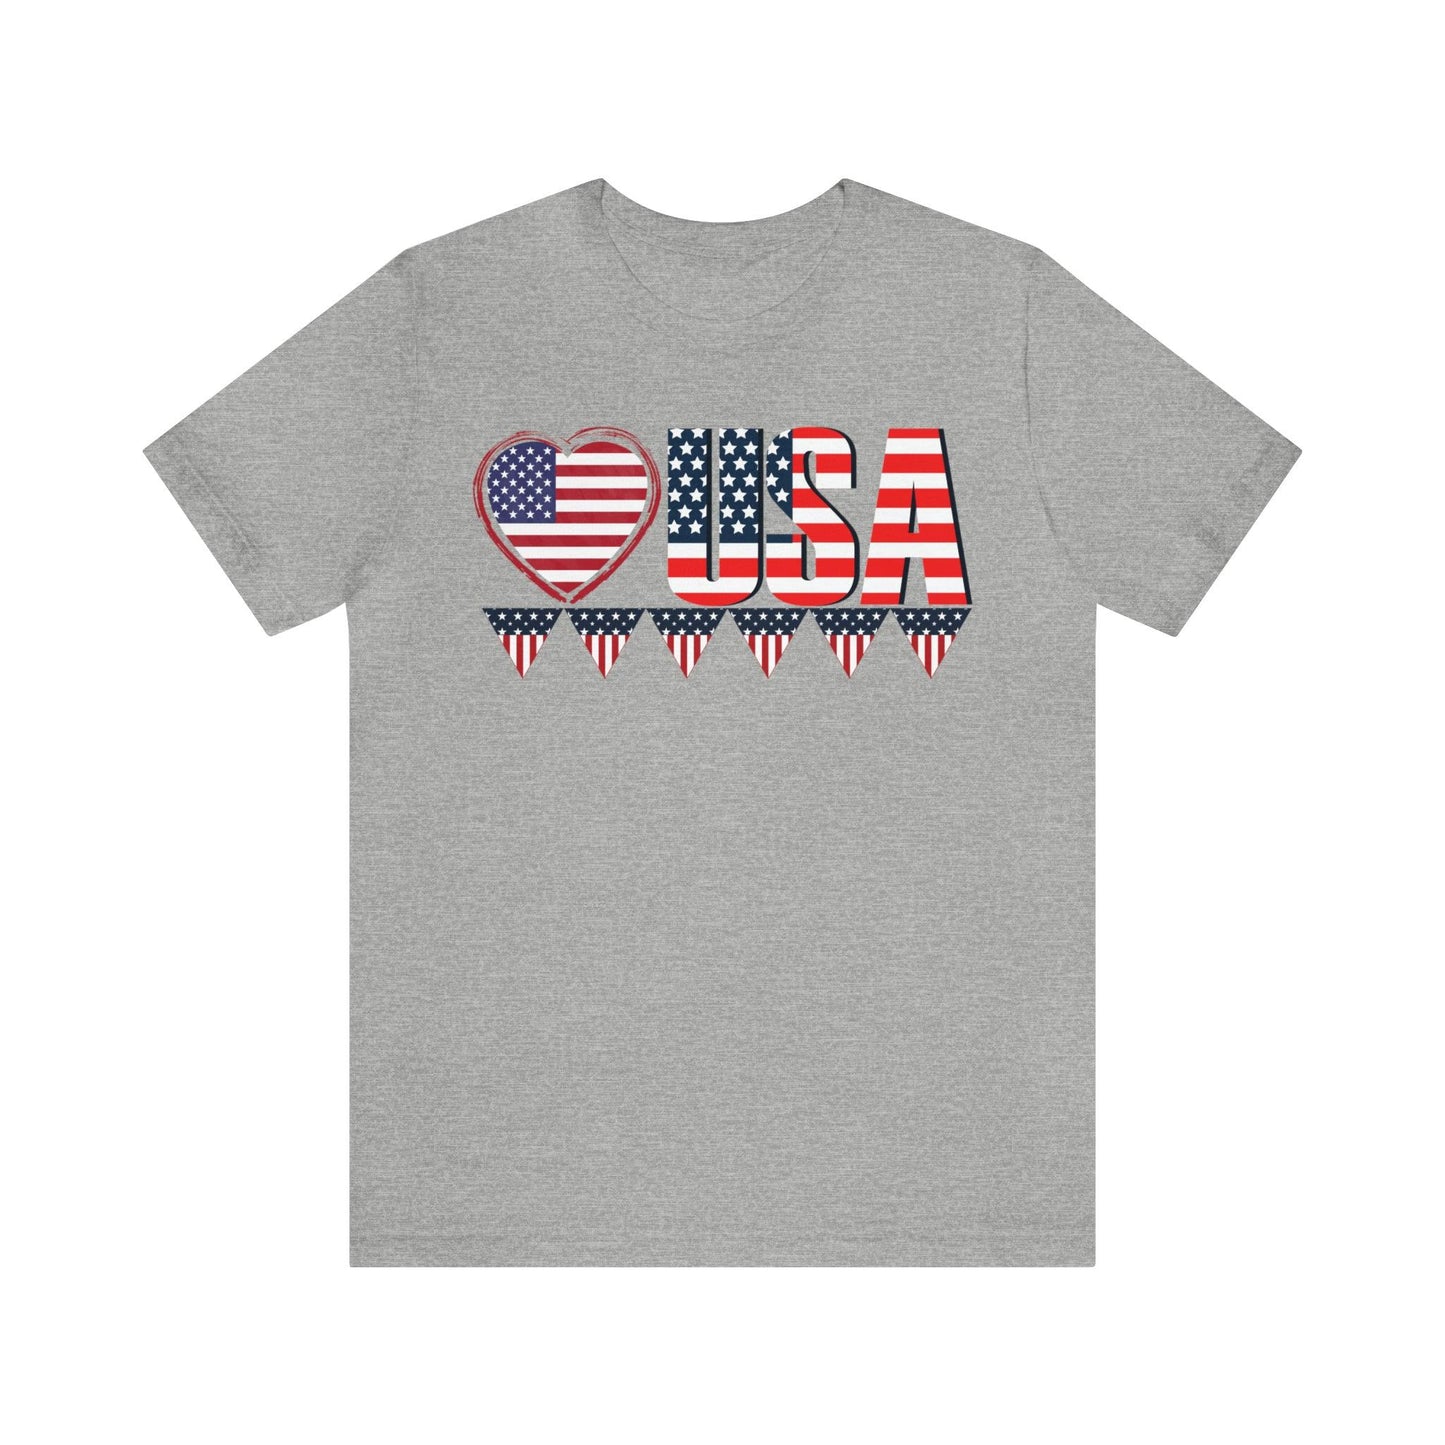 Love USA American flag shirt, Red, white, and blue shirt, 4th of July shirt